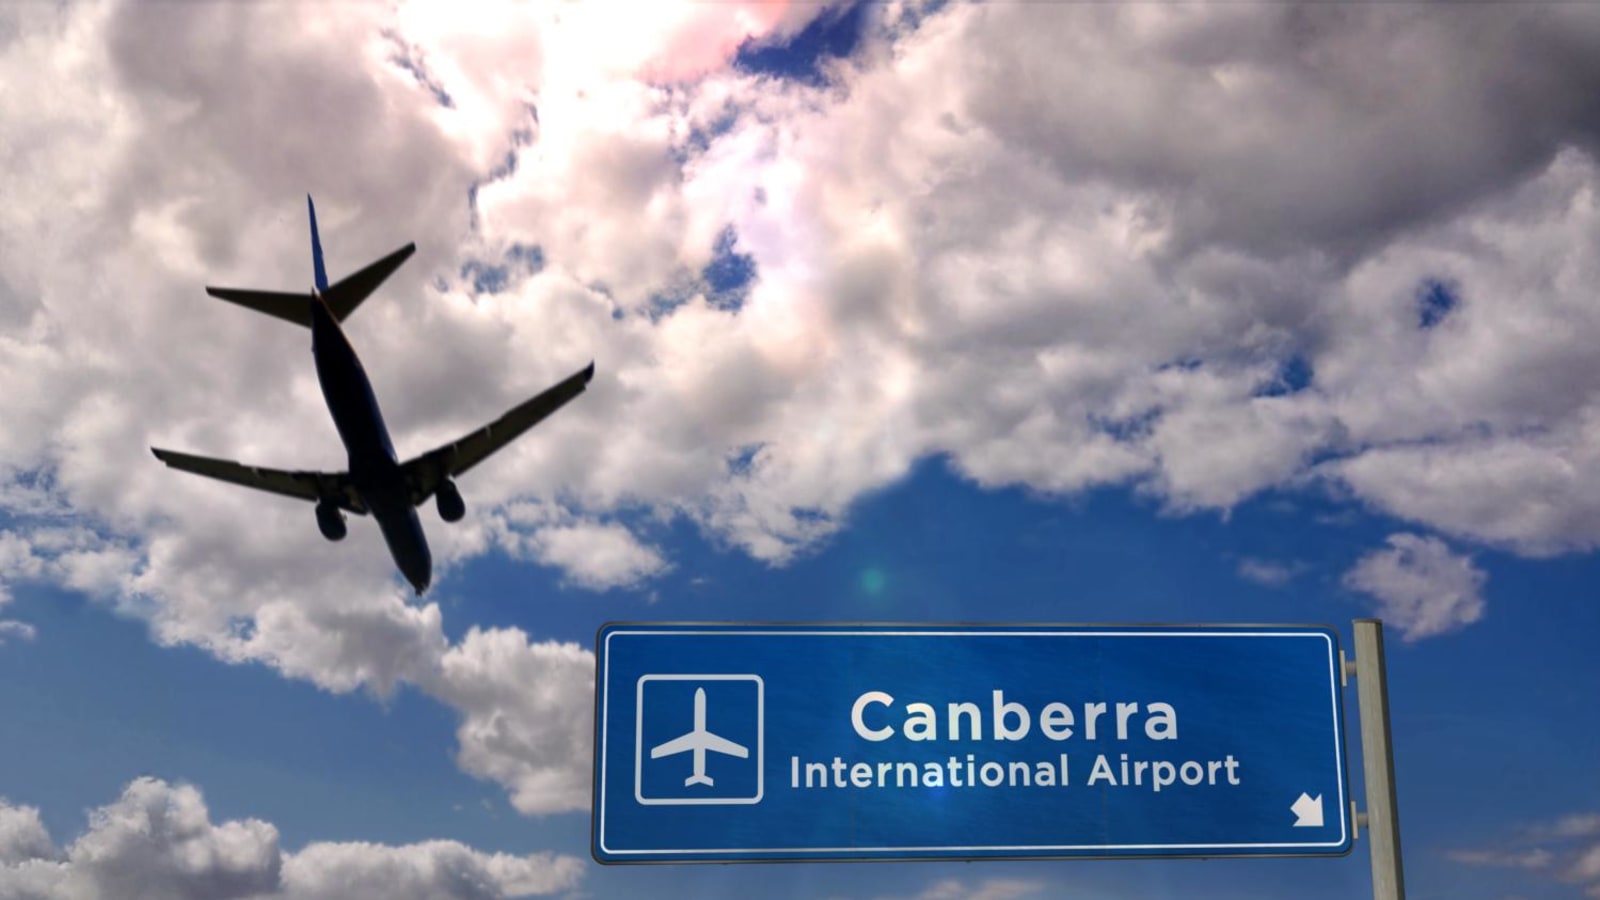 Police detain gunman in Canberra airport shooting